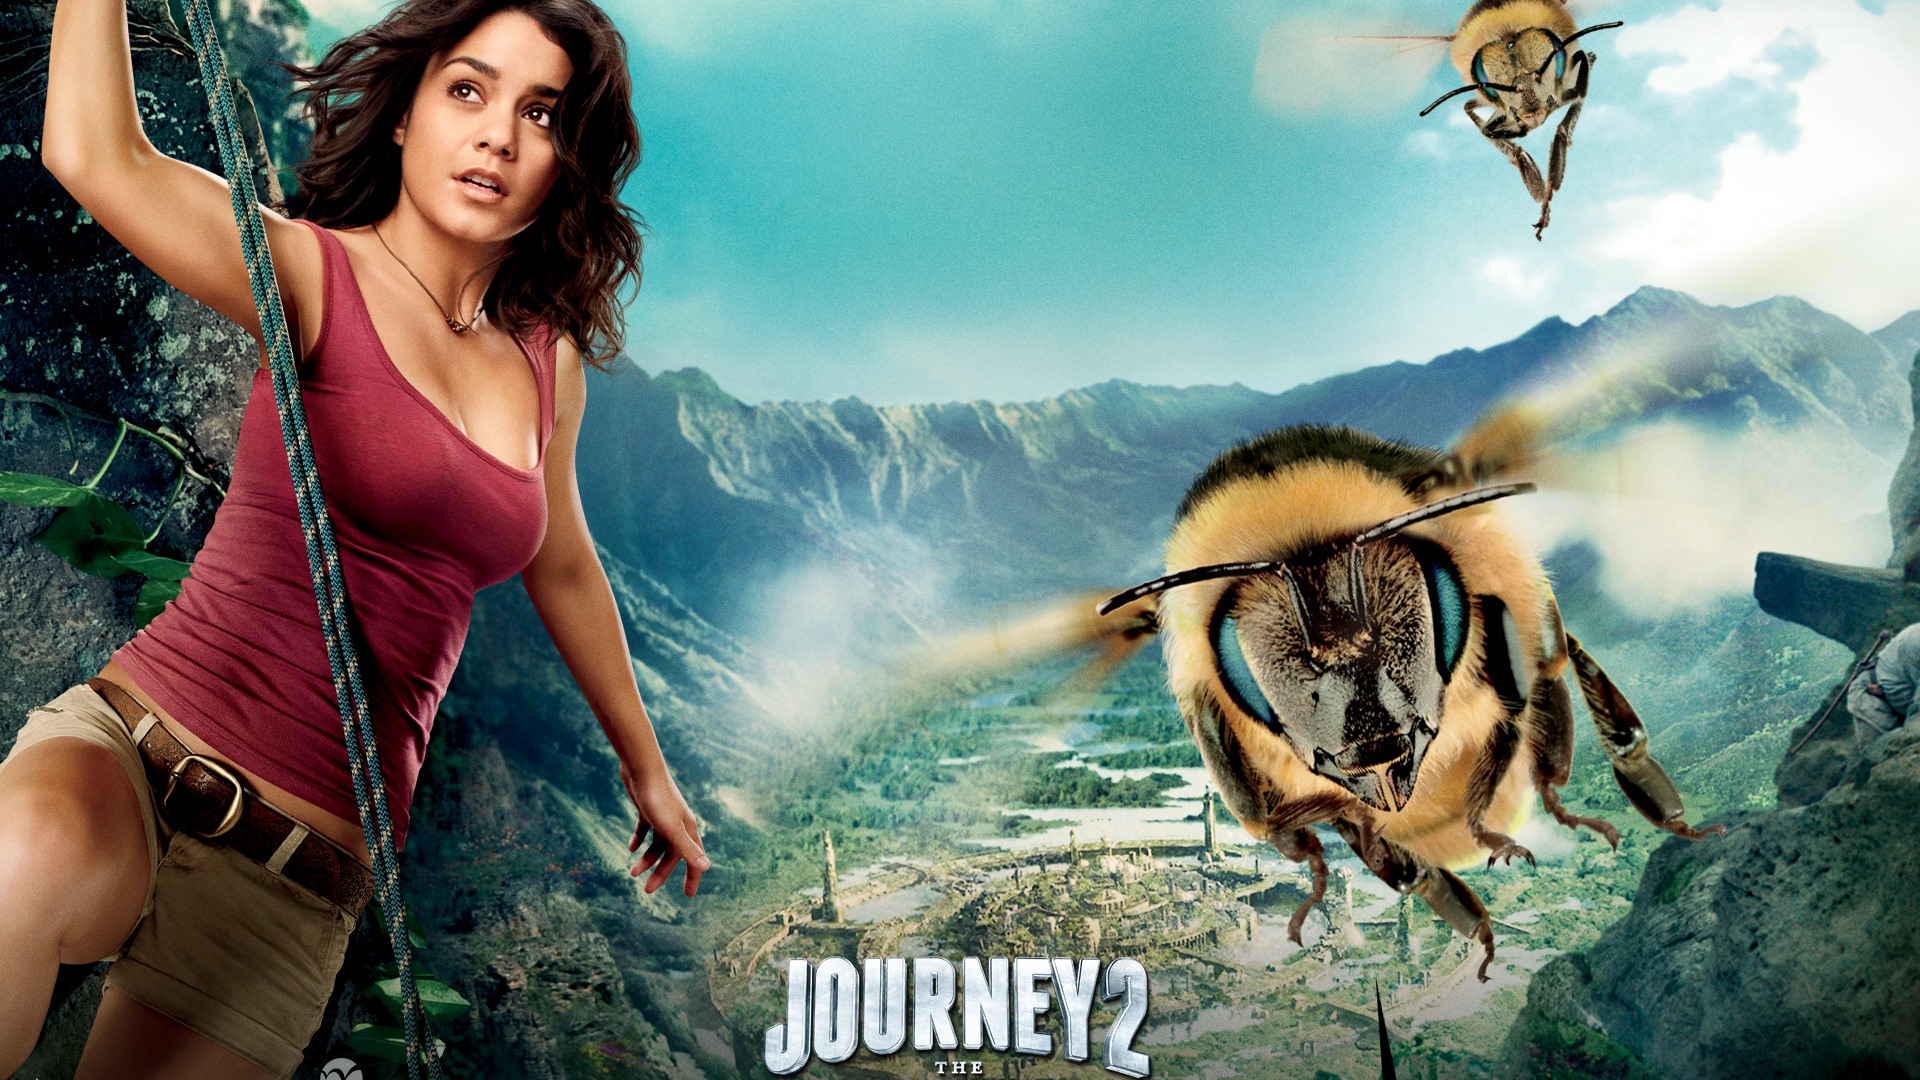 Journey 2: The Mysterious Island HD Wallpaper #11 - 1920x1080